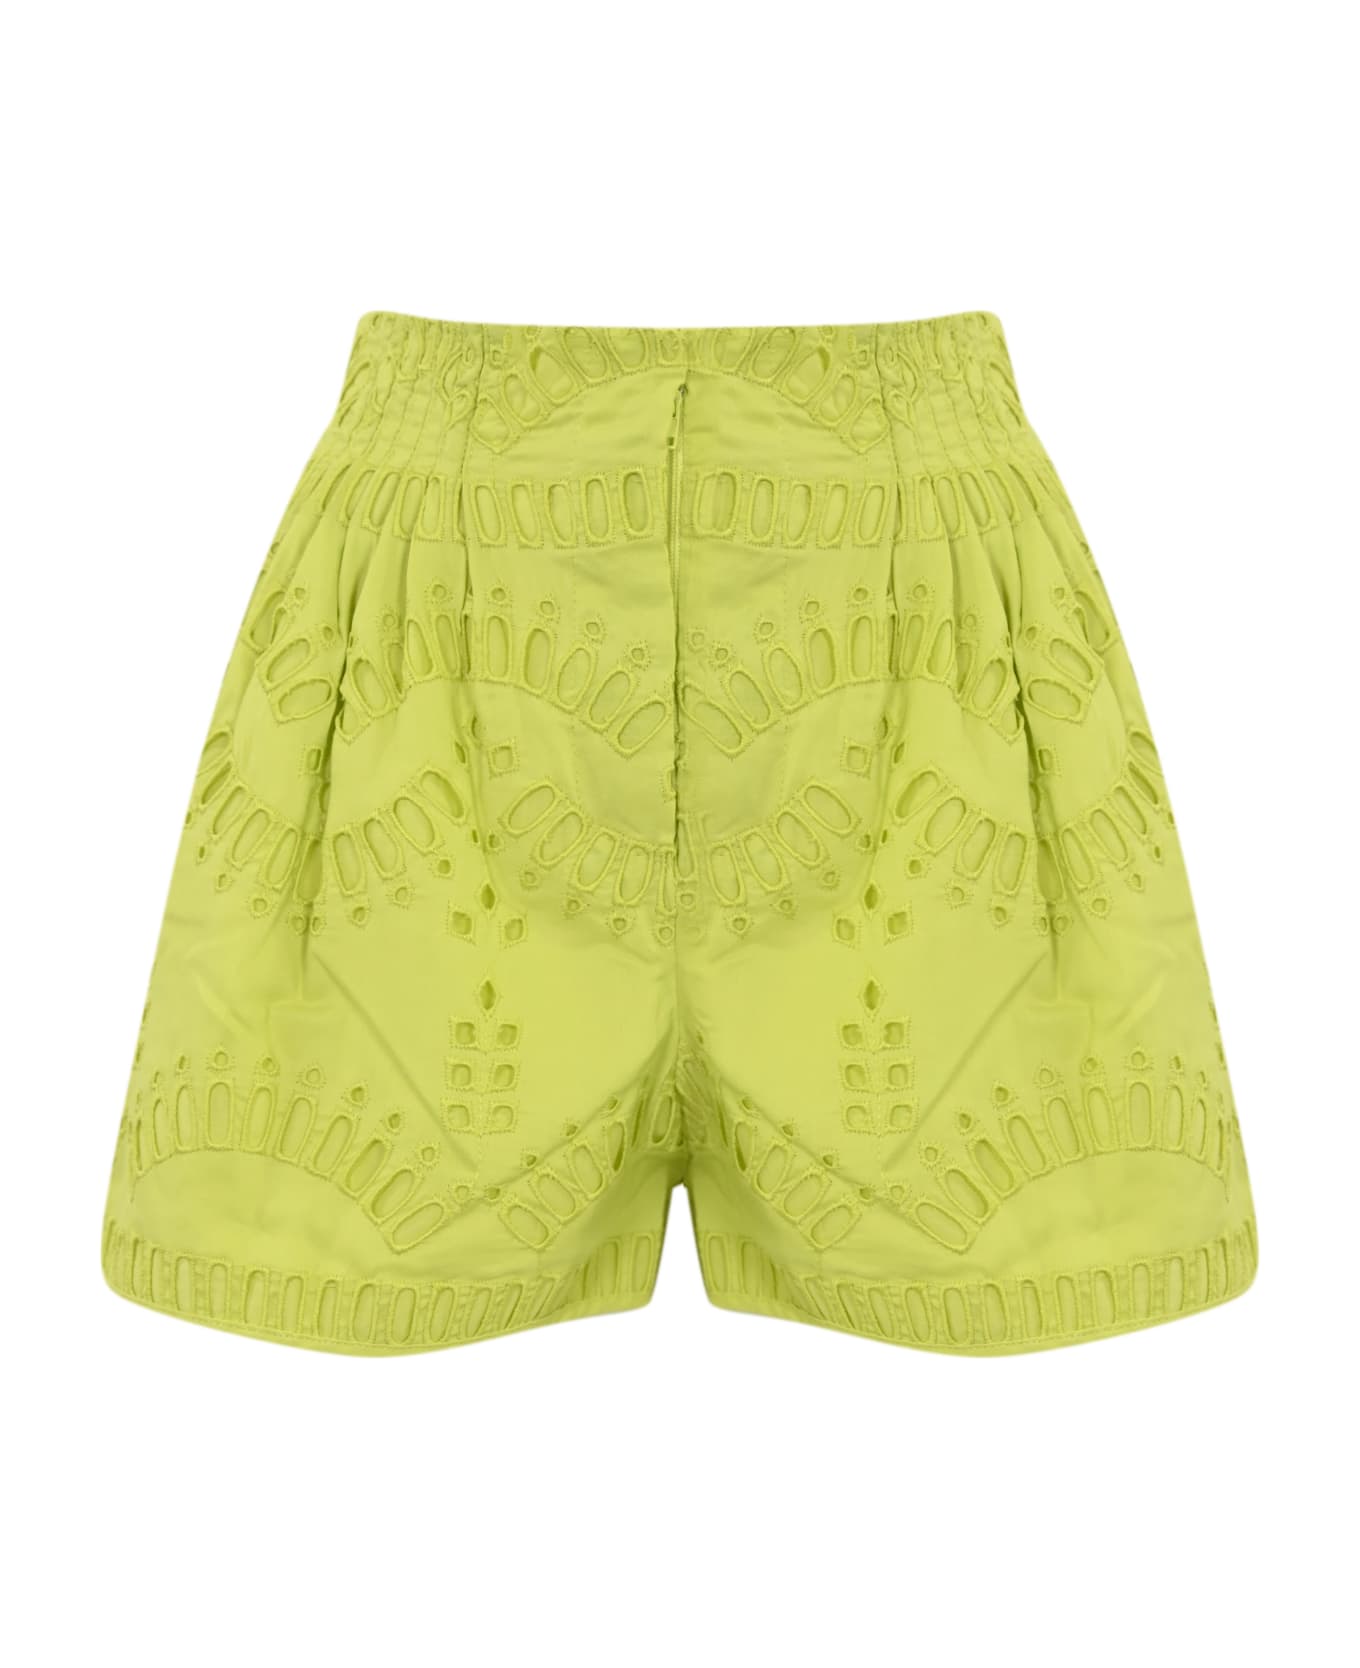 Charo Ruiz Palok Shorts In Broderie Anglaise - Lime punch